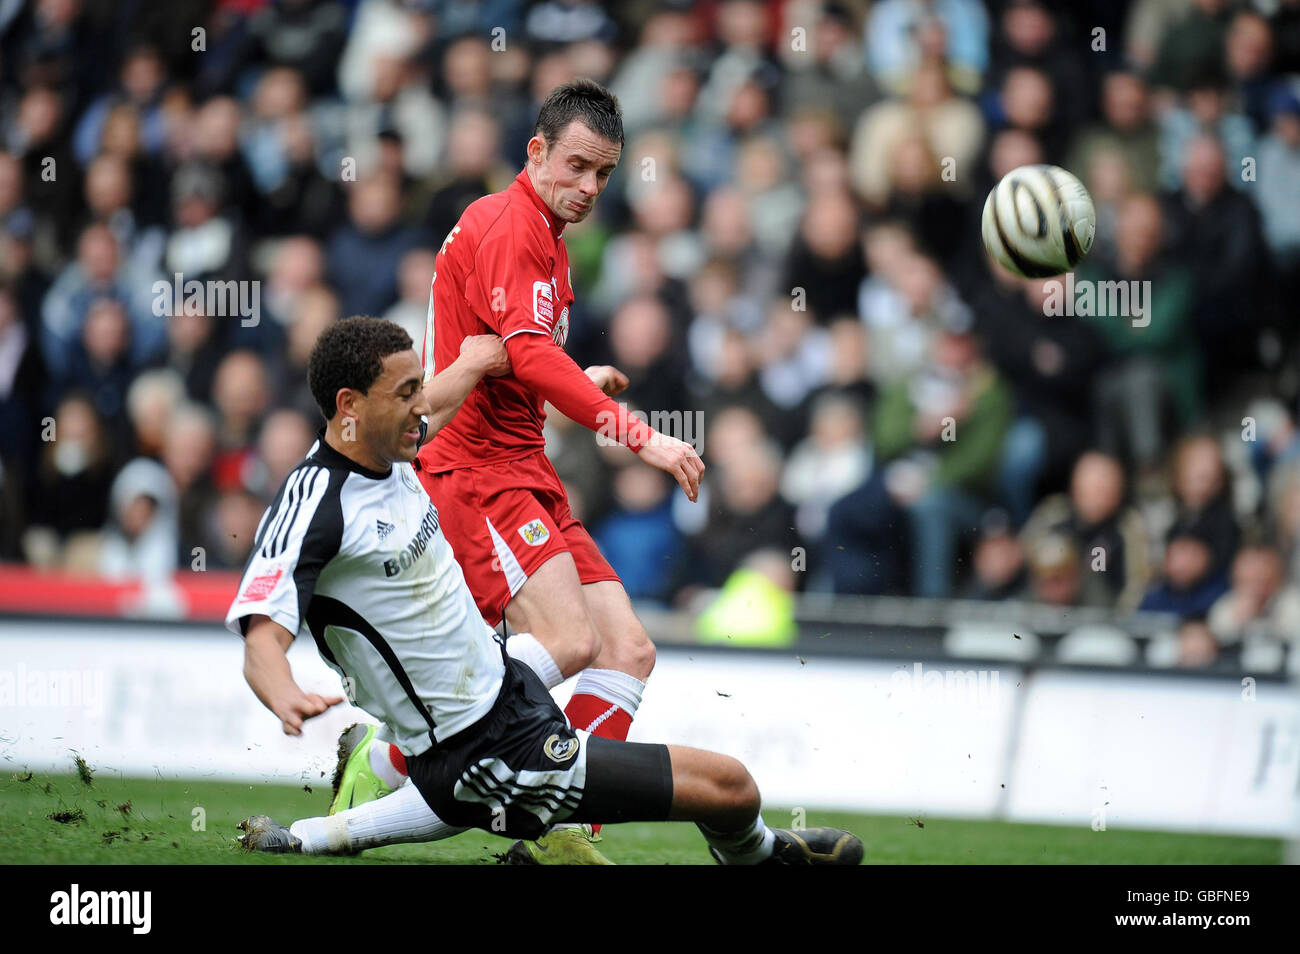 Derby County's Lewin Nyatanga slides in to tackle Bristol City's Michael McIndoe during the Coca-Cola Championship match at Pride Park, Derby. Stock Photo